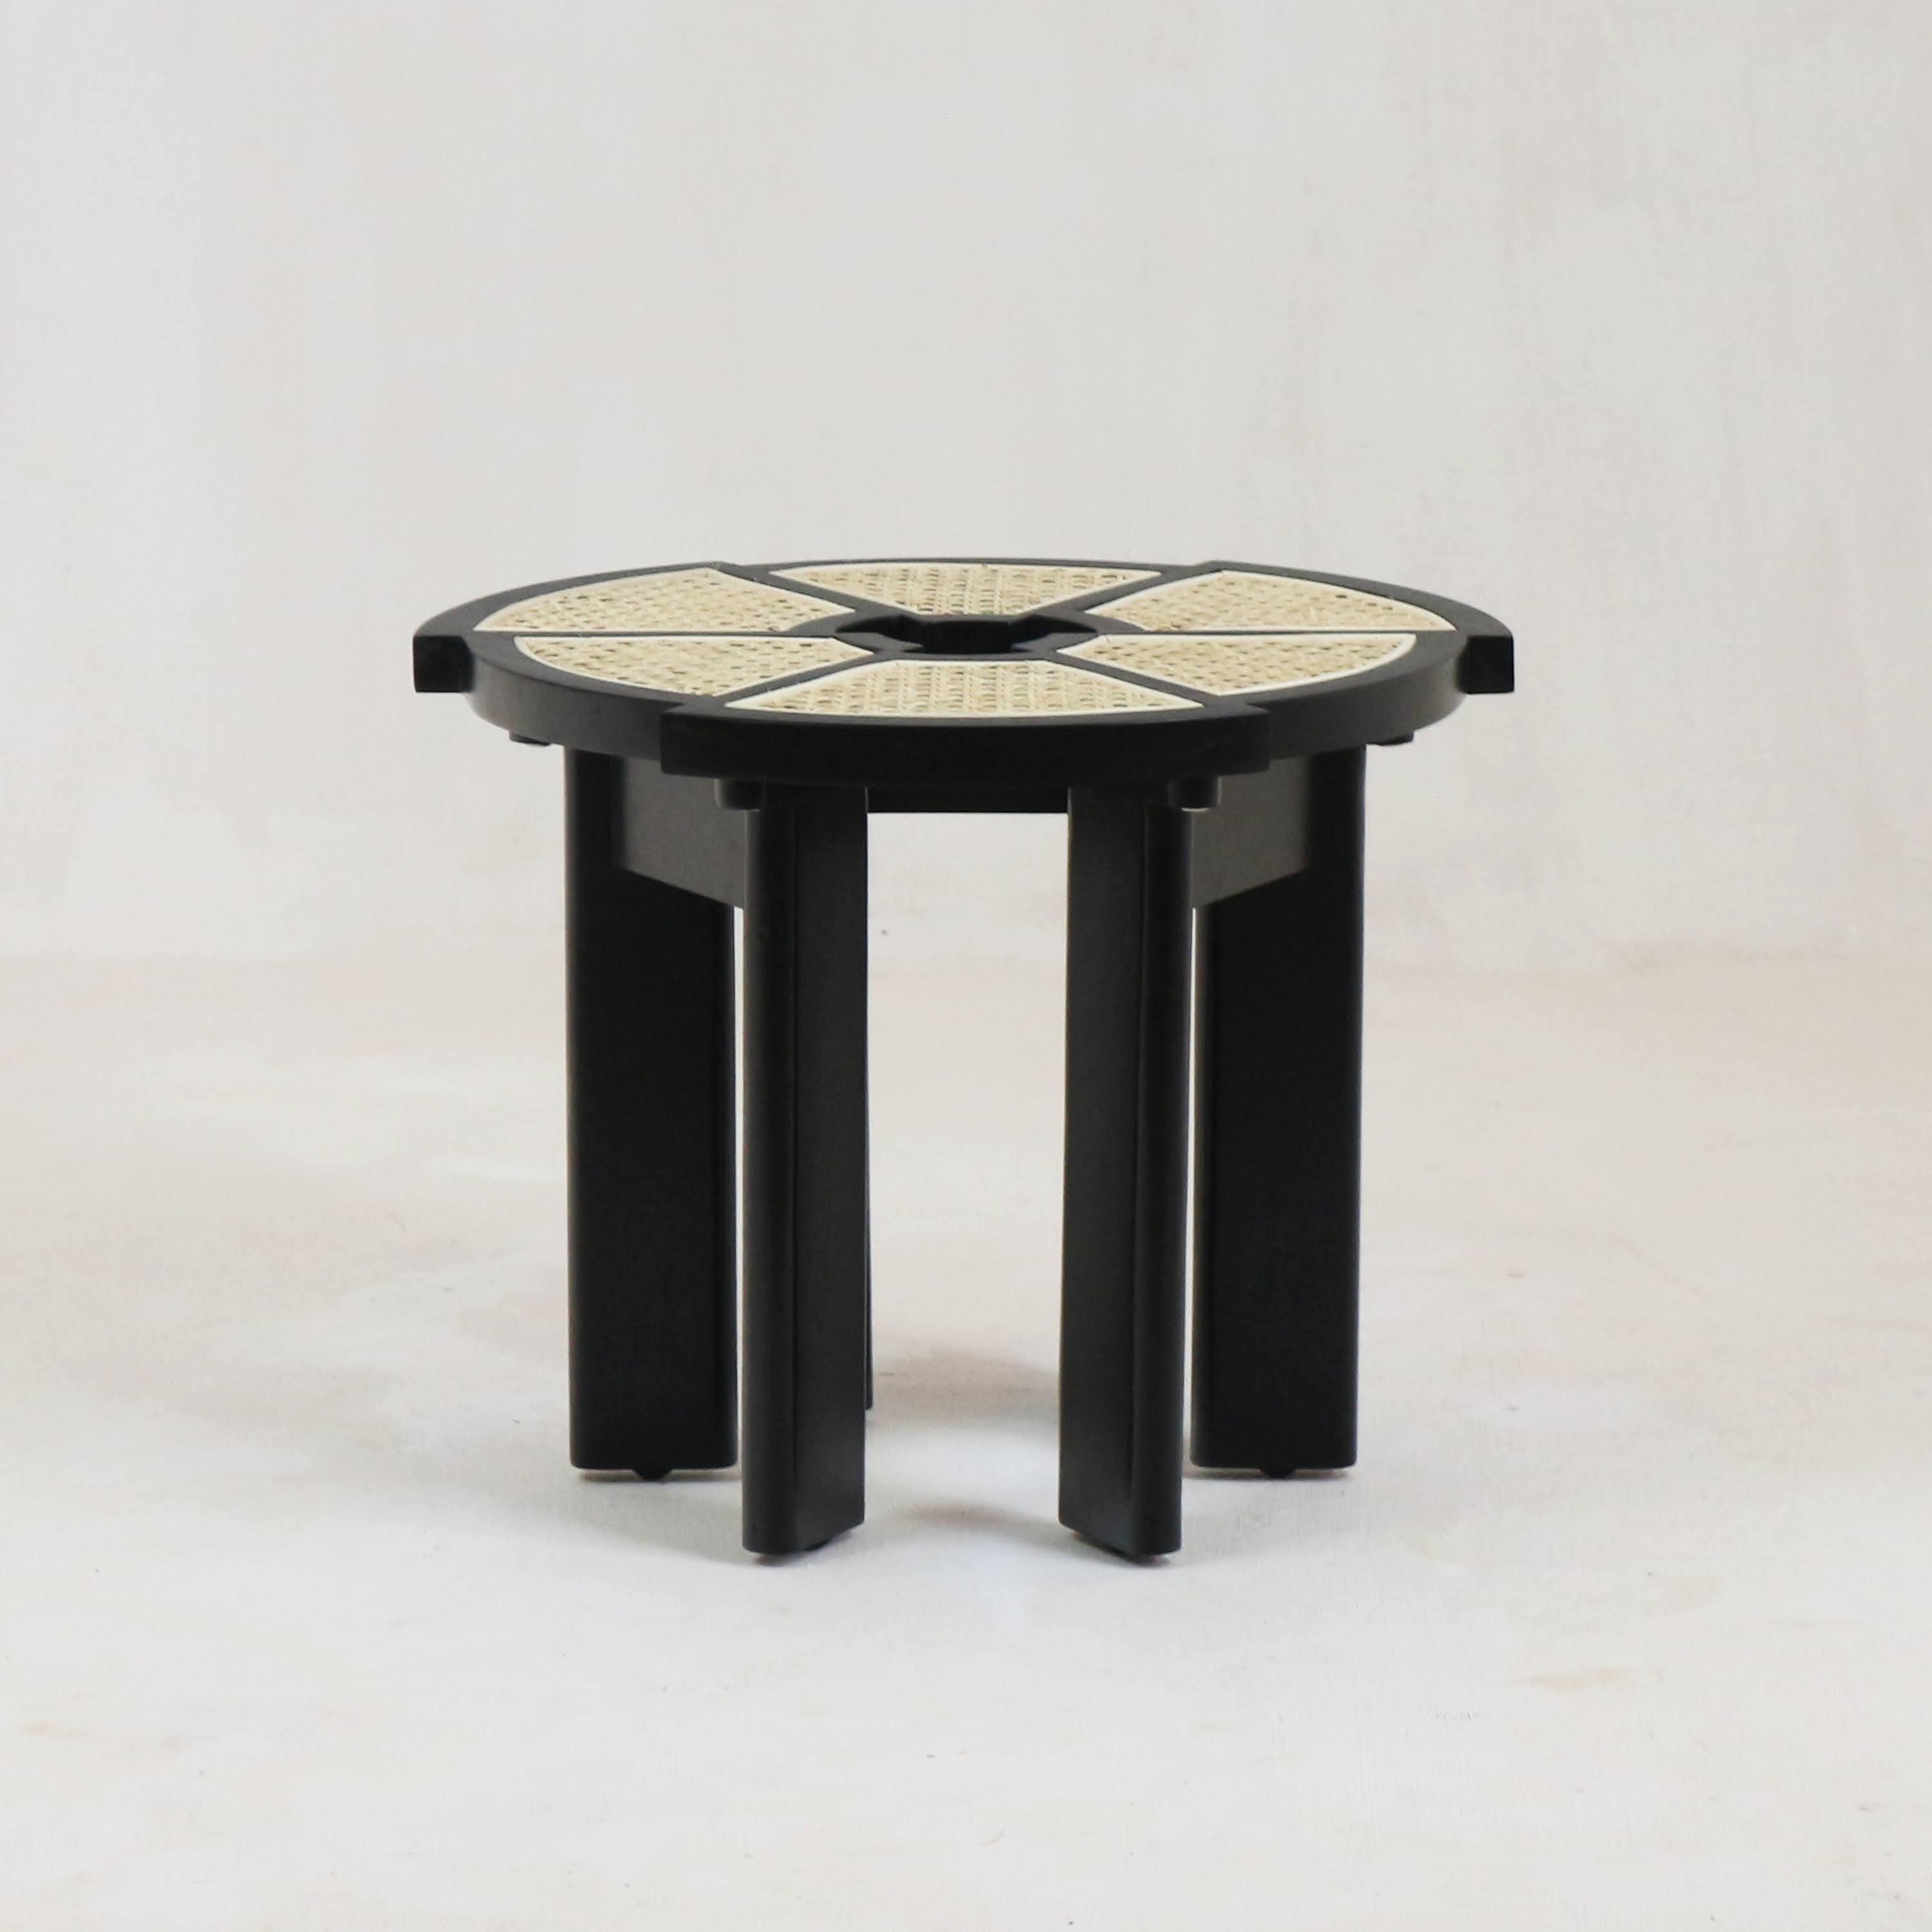 Cane Rio Coffee Table by Charlotte Perriand for Cassina